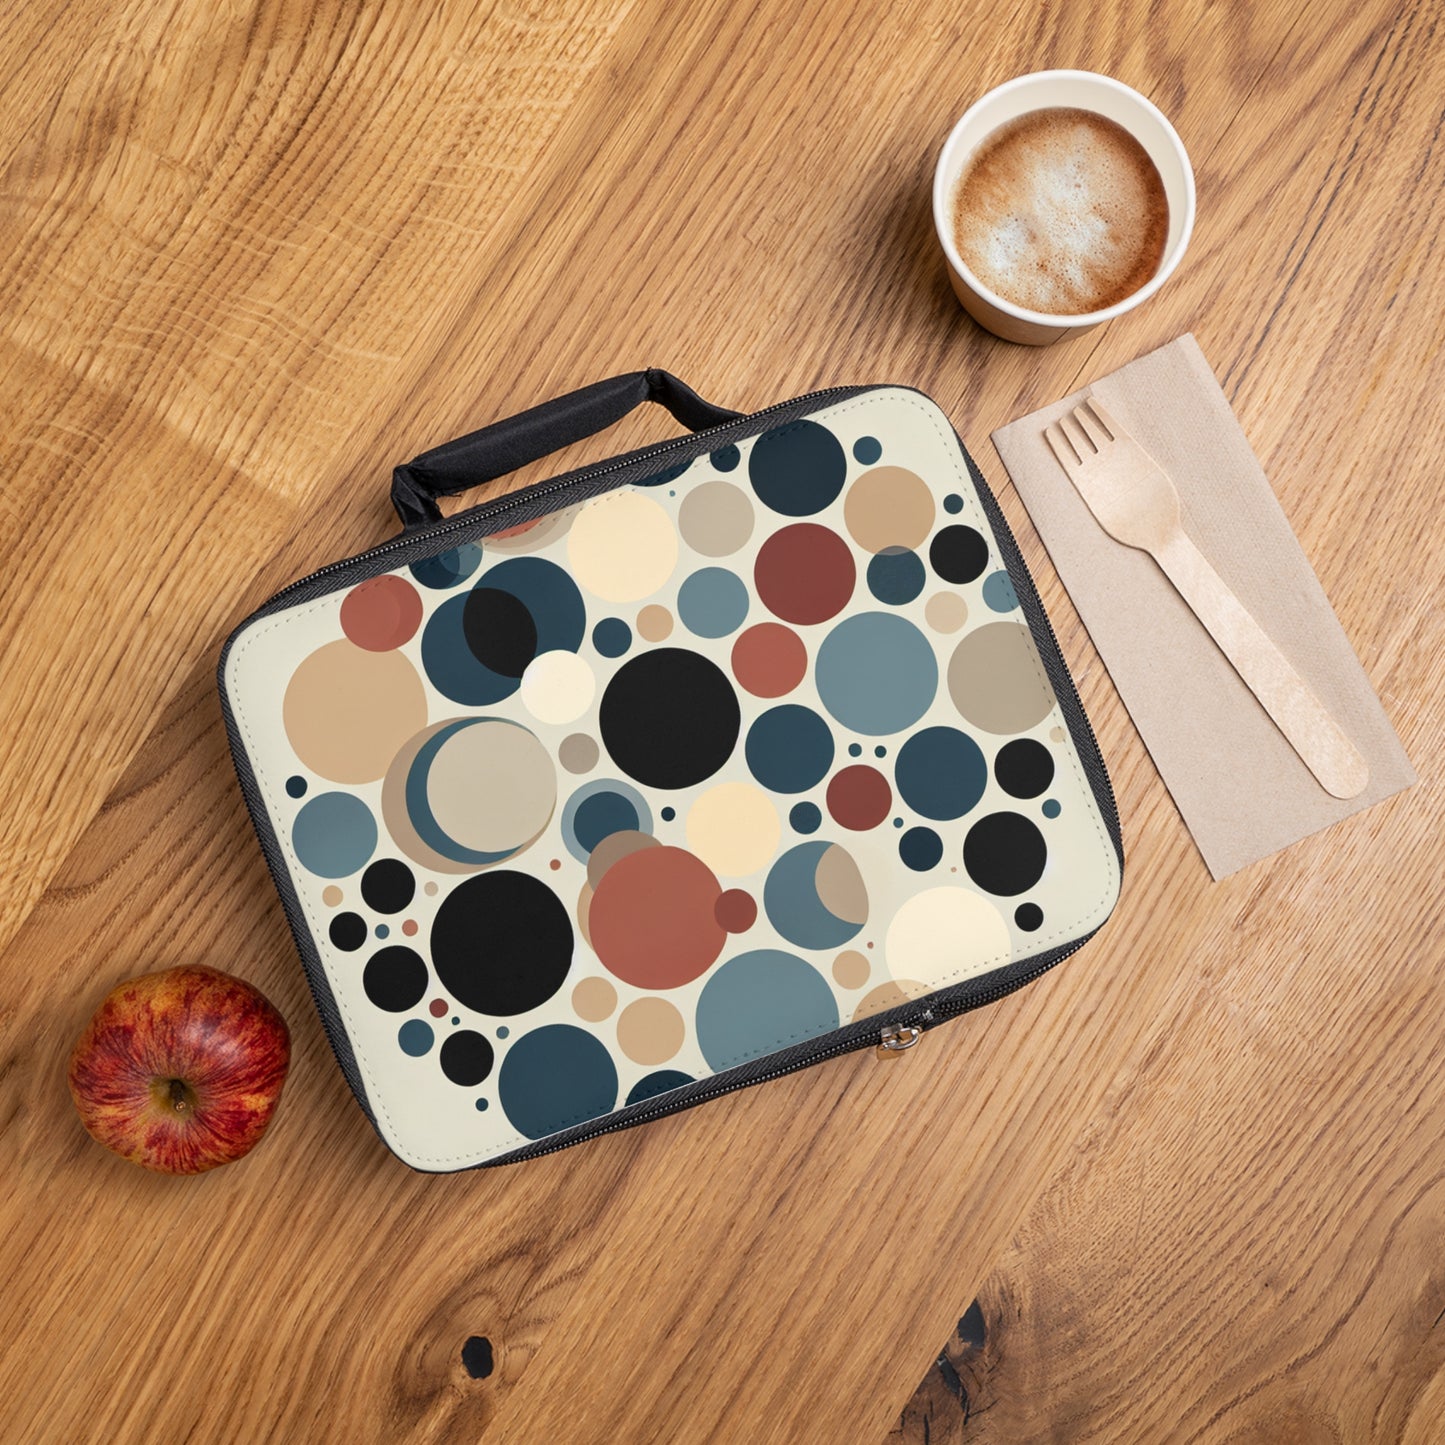 "Interwoven Circles: A Minimalist Approach" - The Alien Lunch Bag Minimalism Style